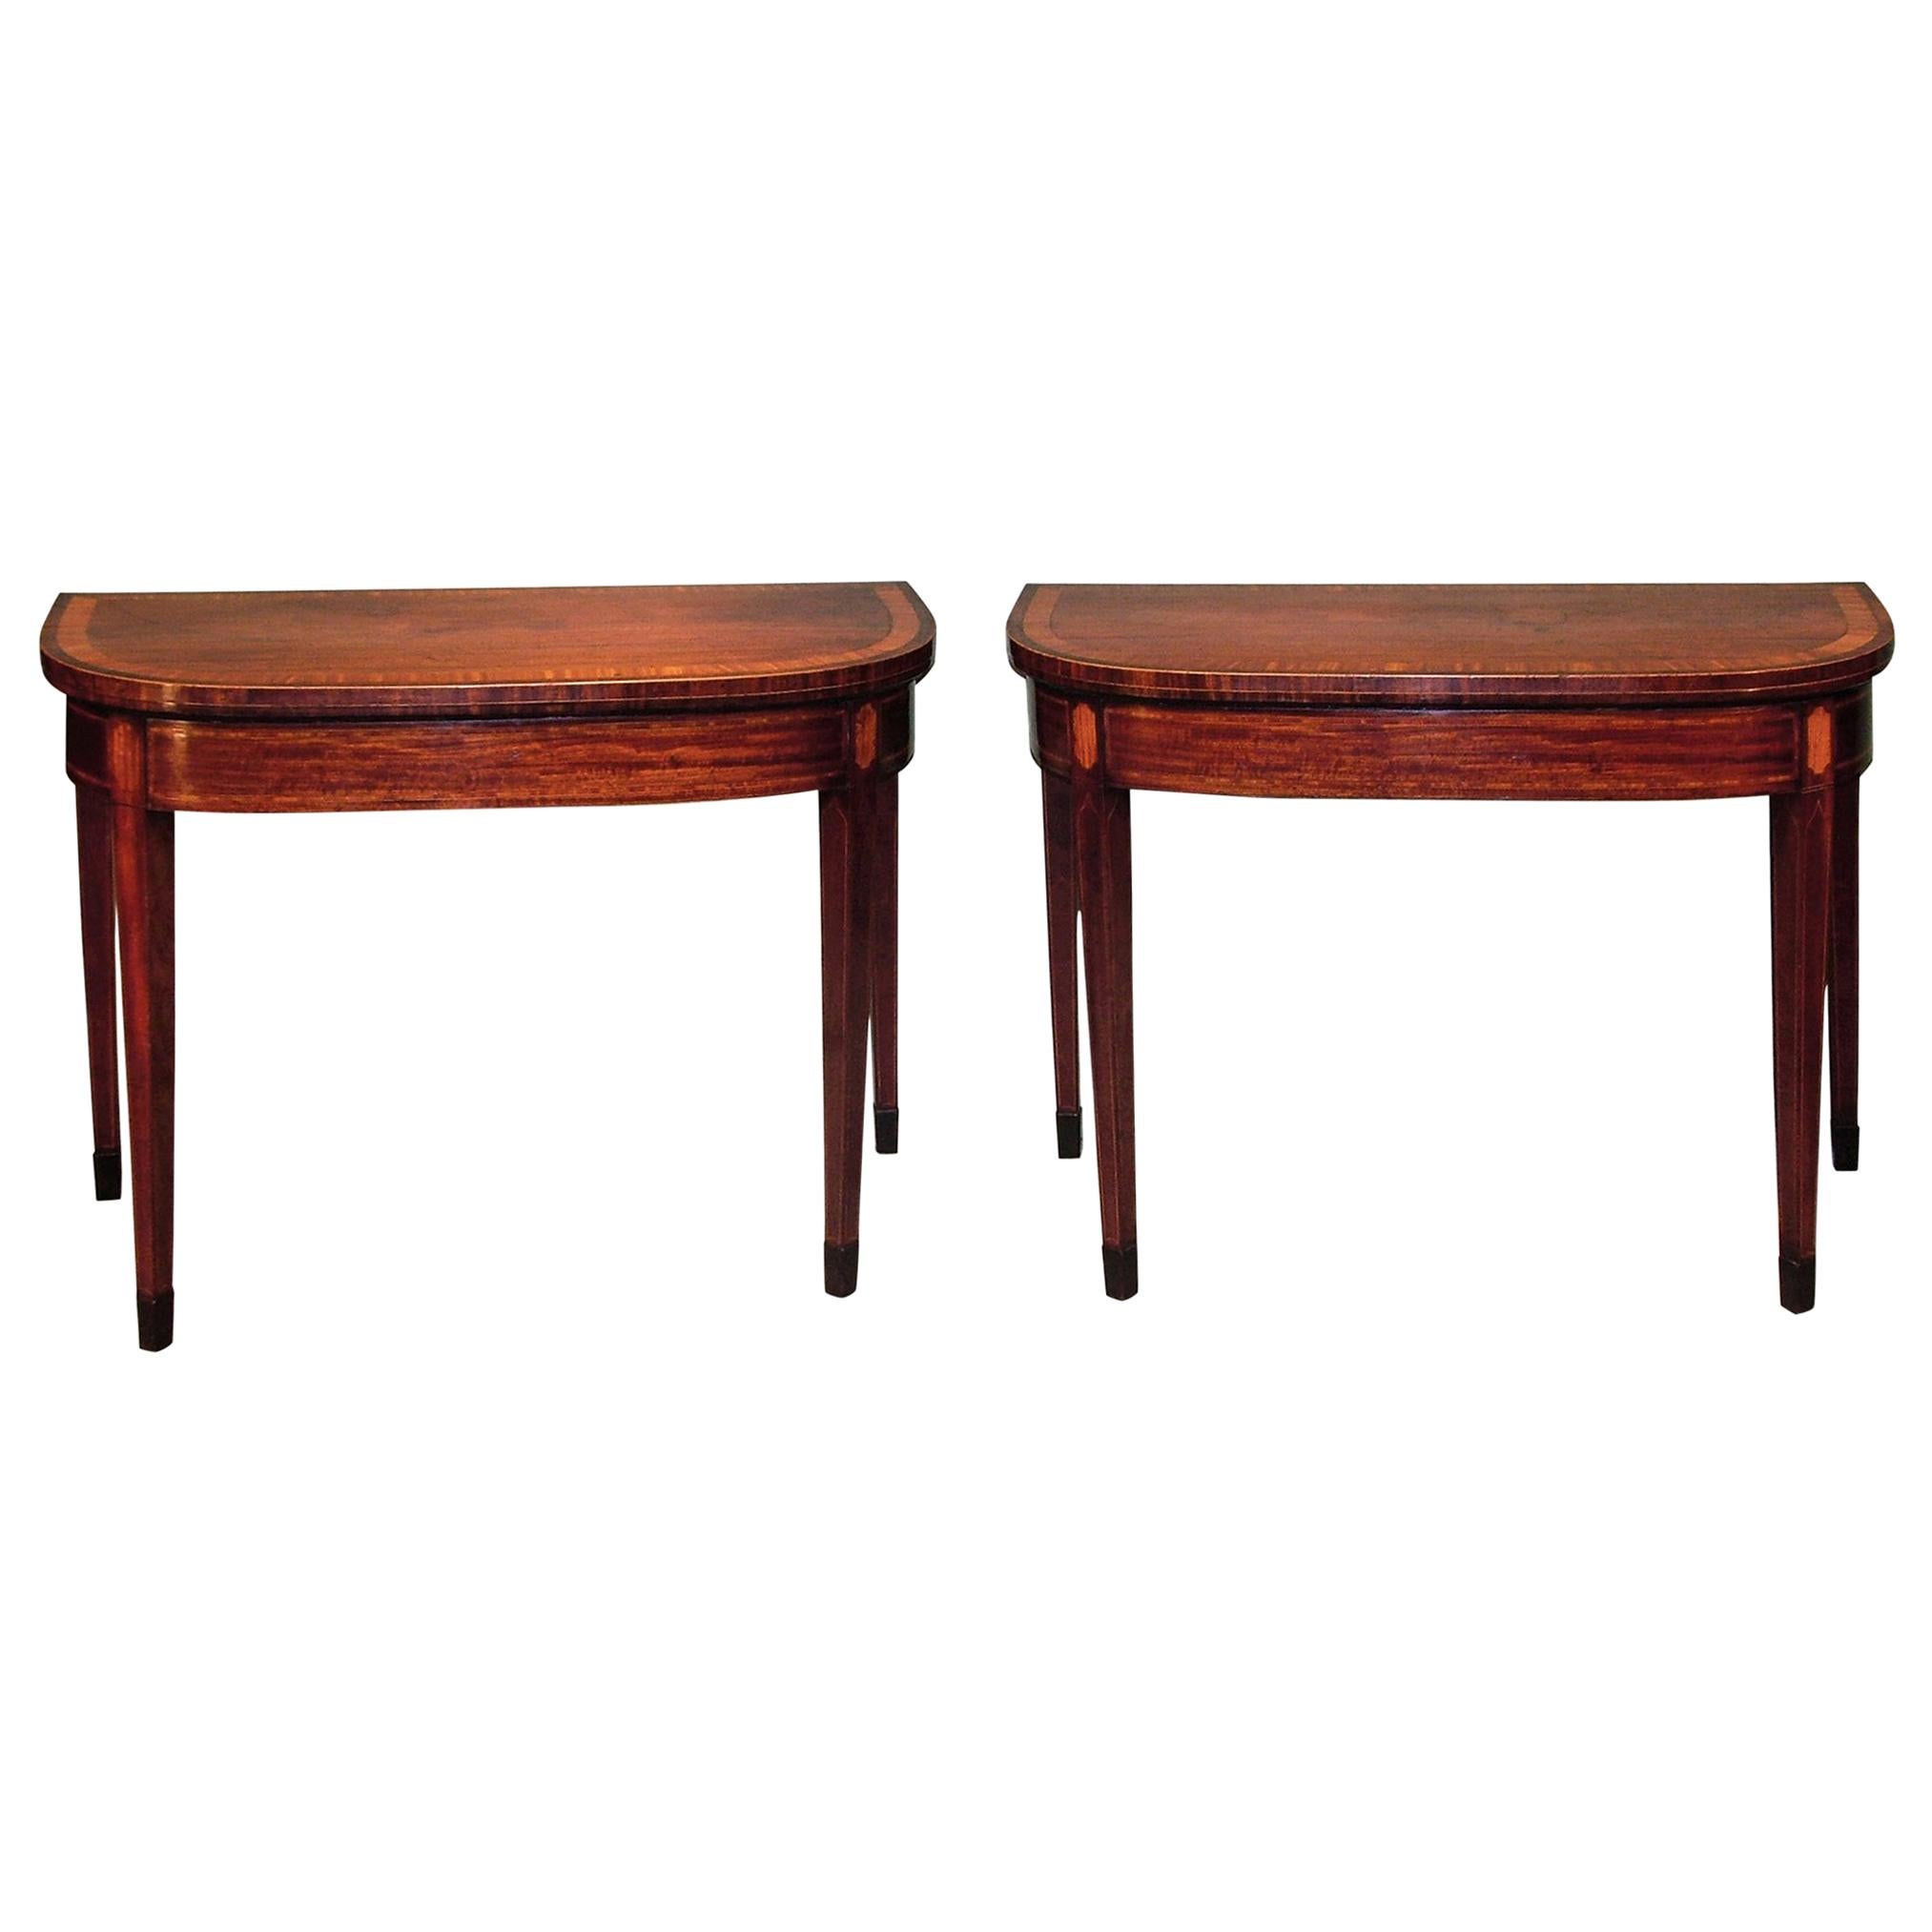 Pair of 18th Century Sheraton Period Mahogany Card Tables For Sale